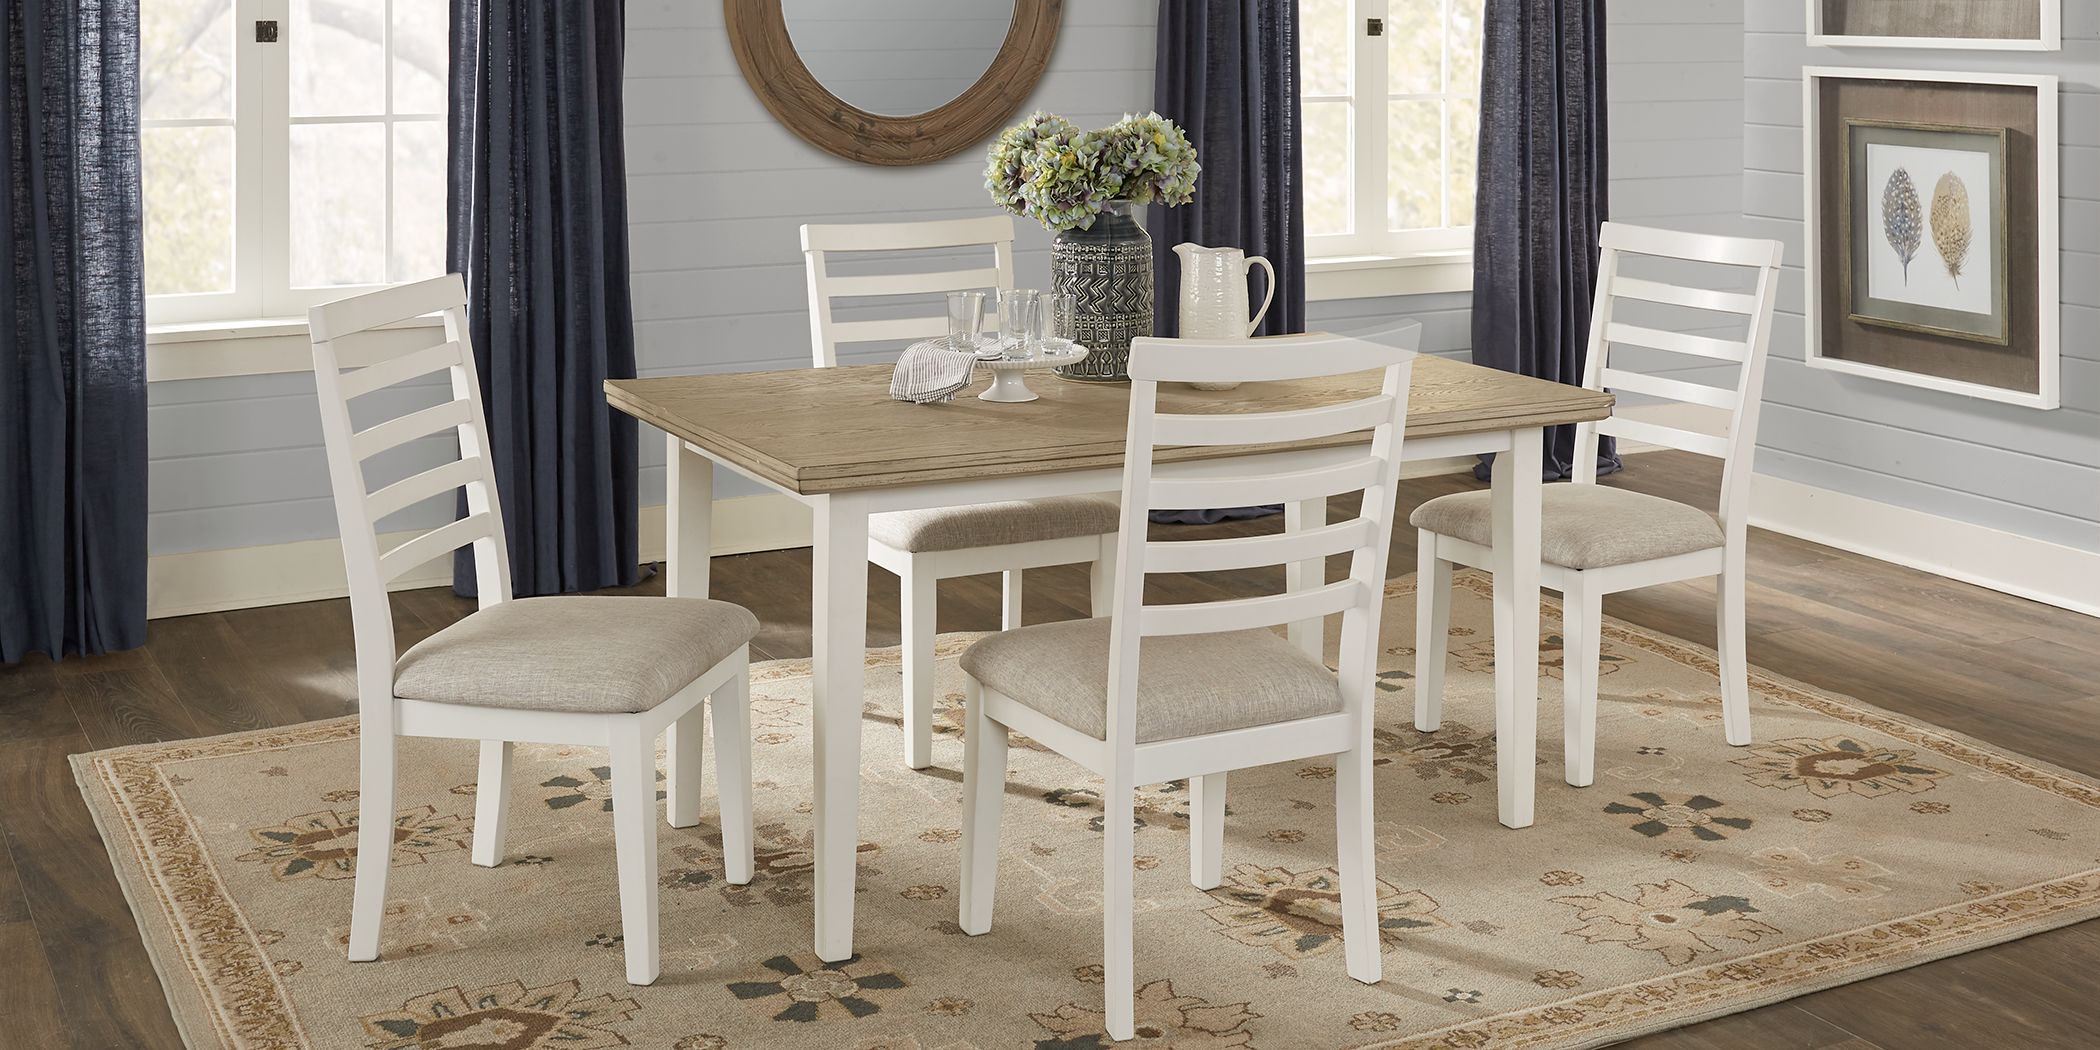 Countryside Cottage Gray 5 Pc Dining Set - Rooms To Go